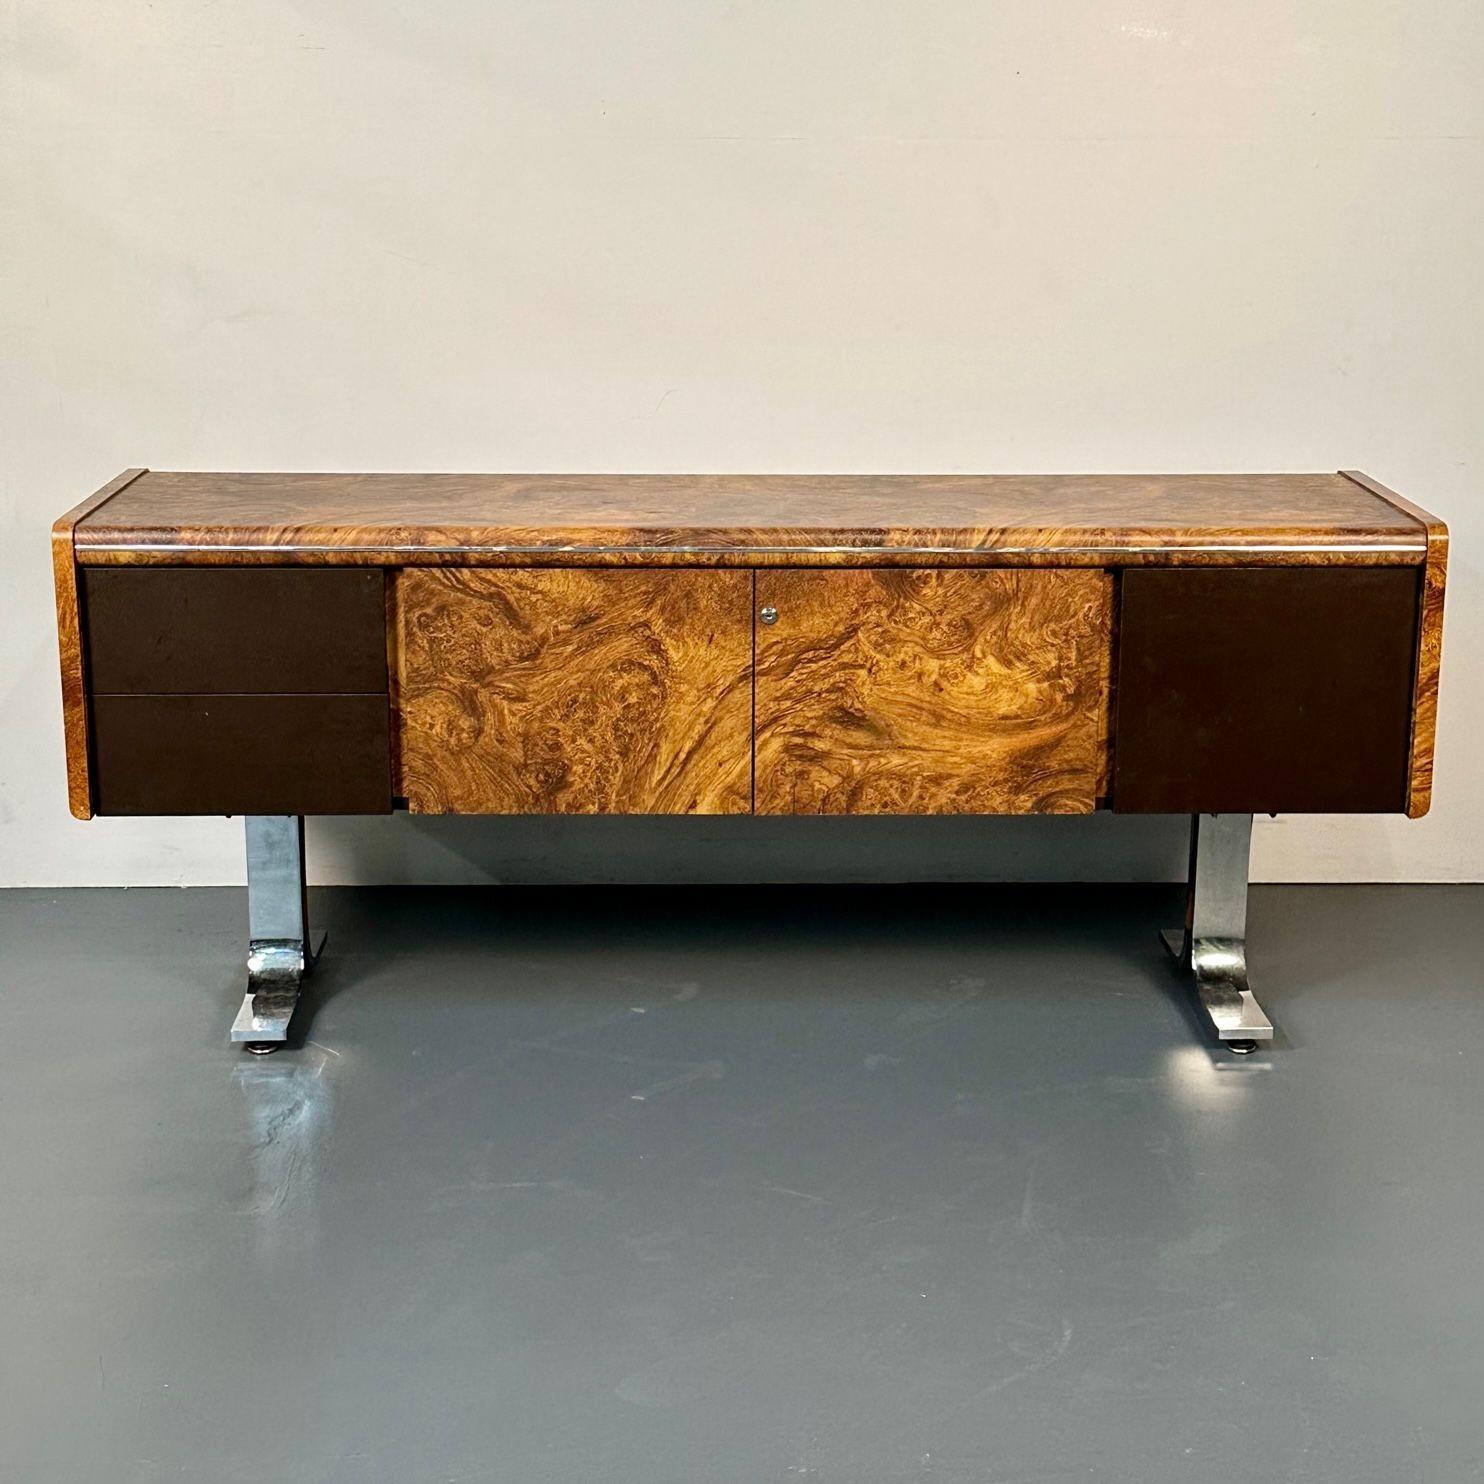 Canadian Leif Jacobsen Style, Mid-Century Modern, Credenza, Burlwood, Canada, 1950s For Sale